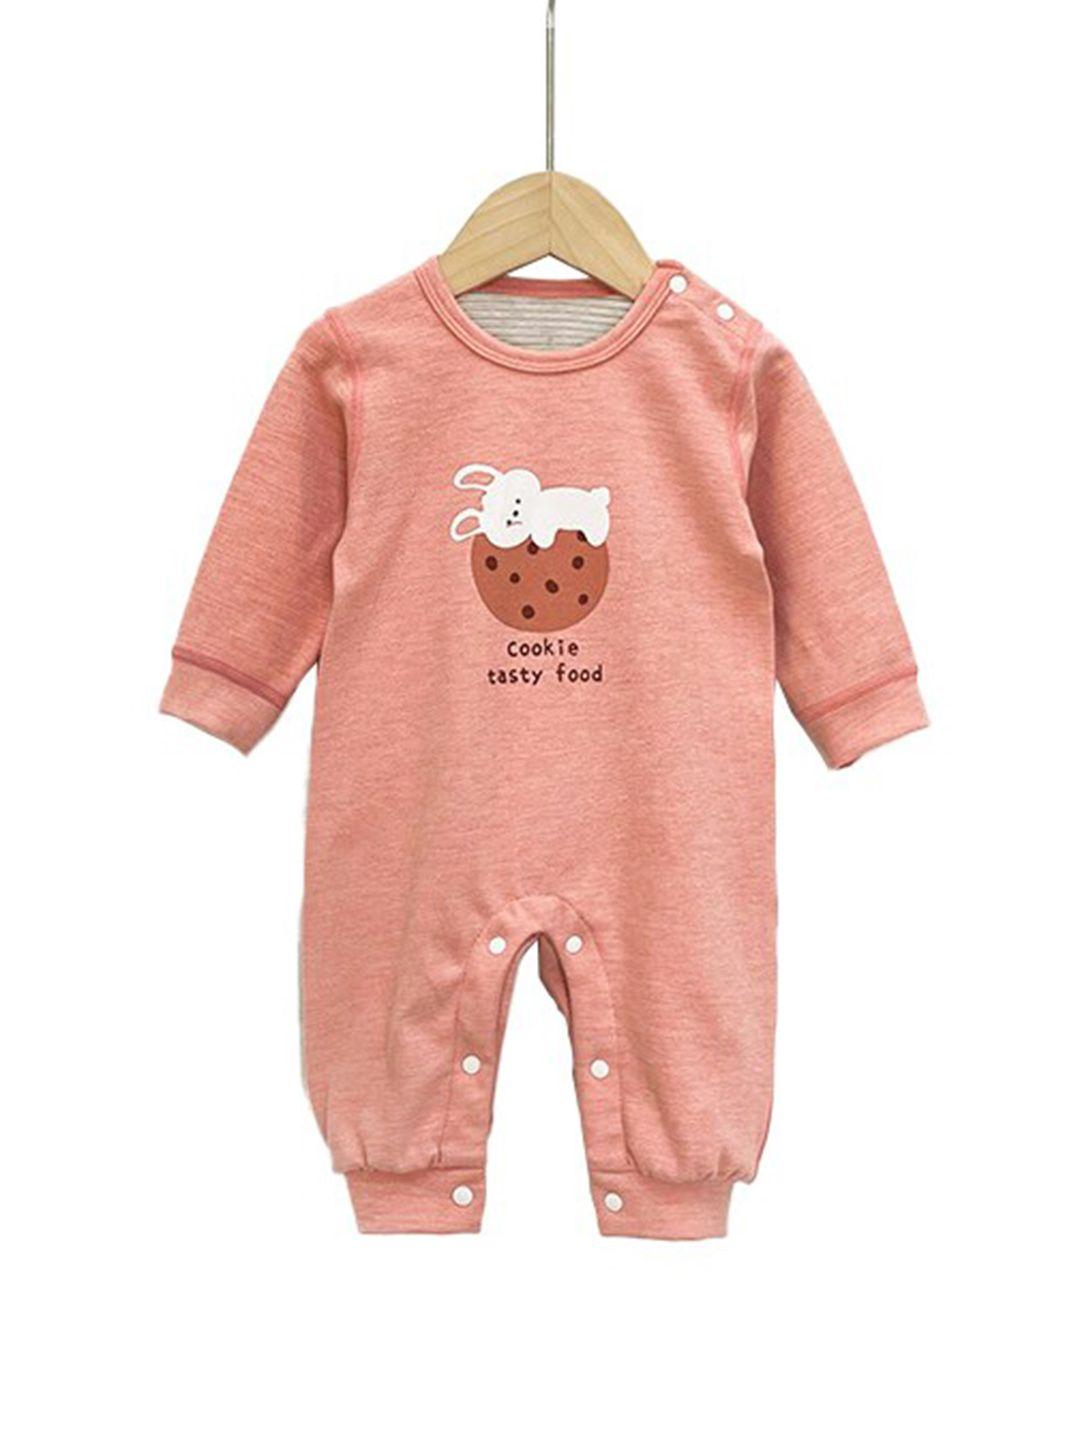 stylecast infants girls pink printed rompers